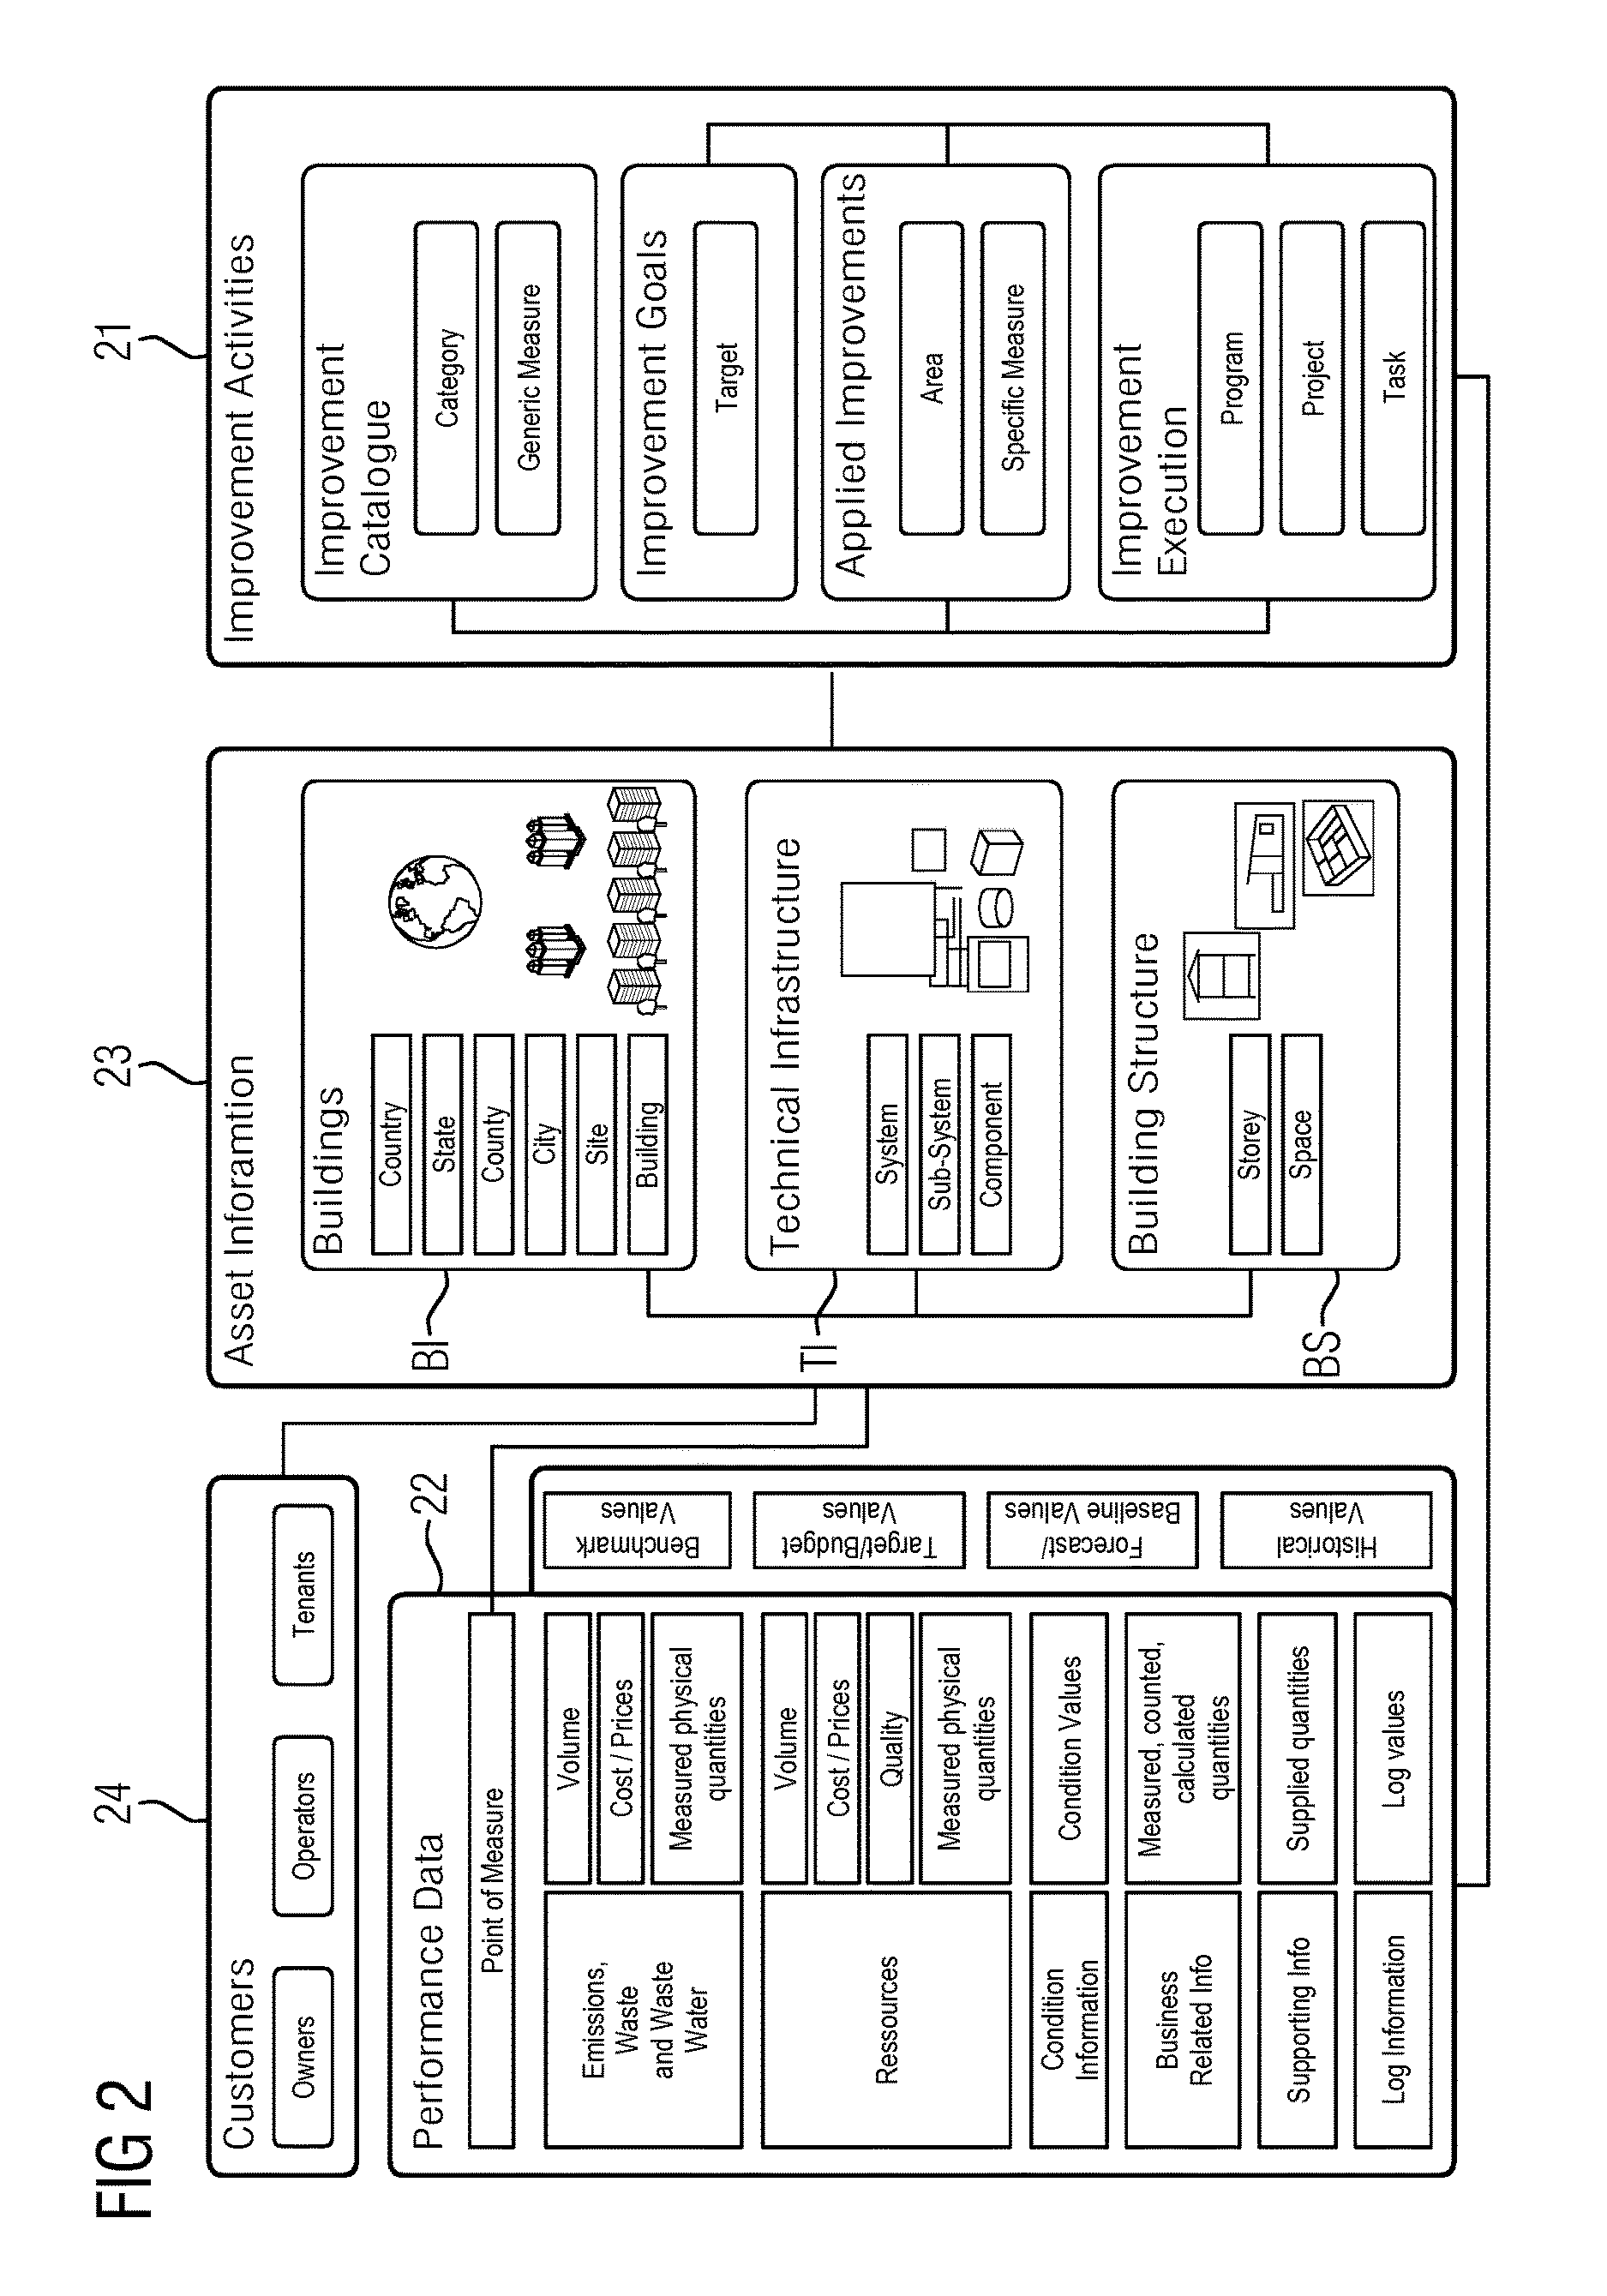 System and method for fault analysis and prioritization